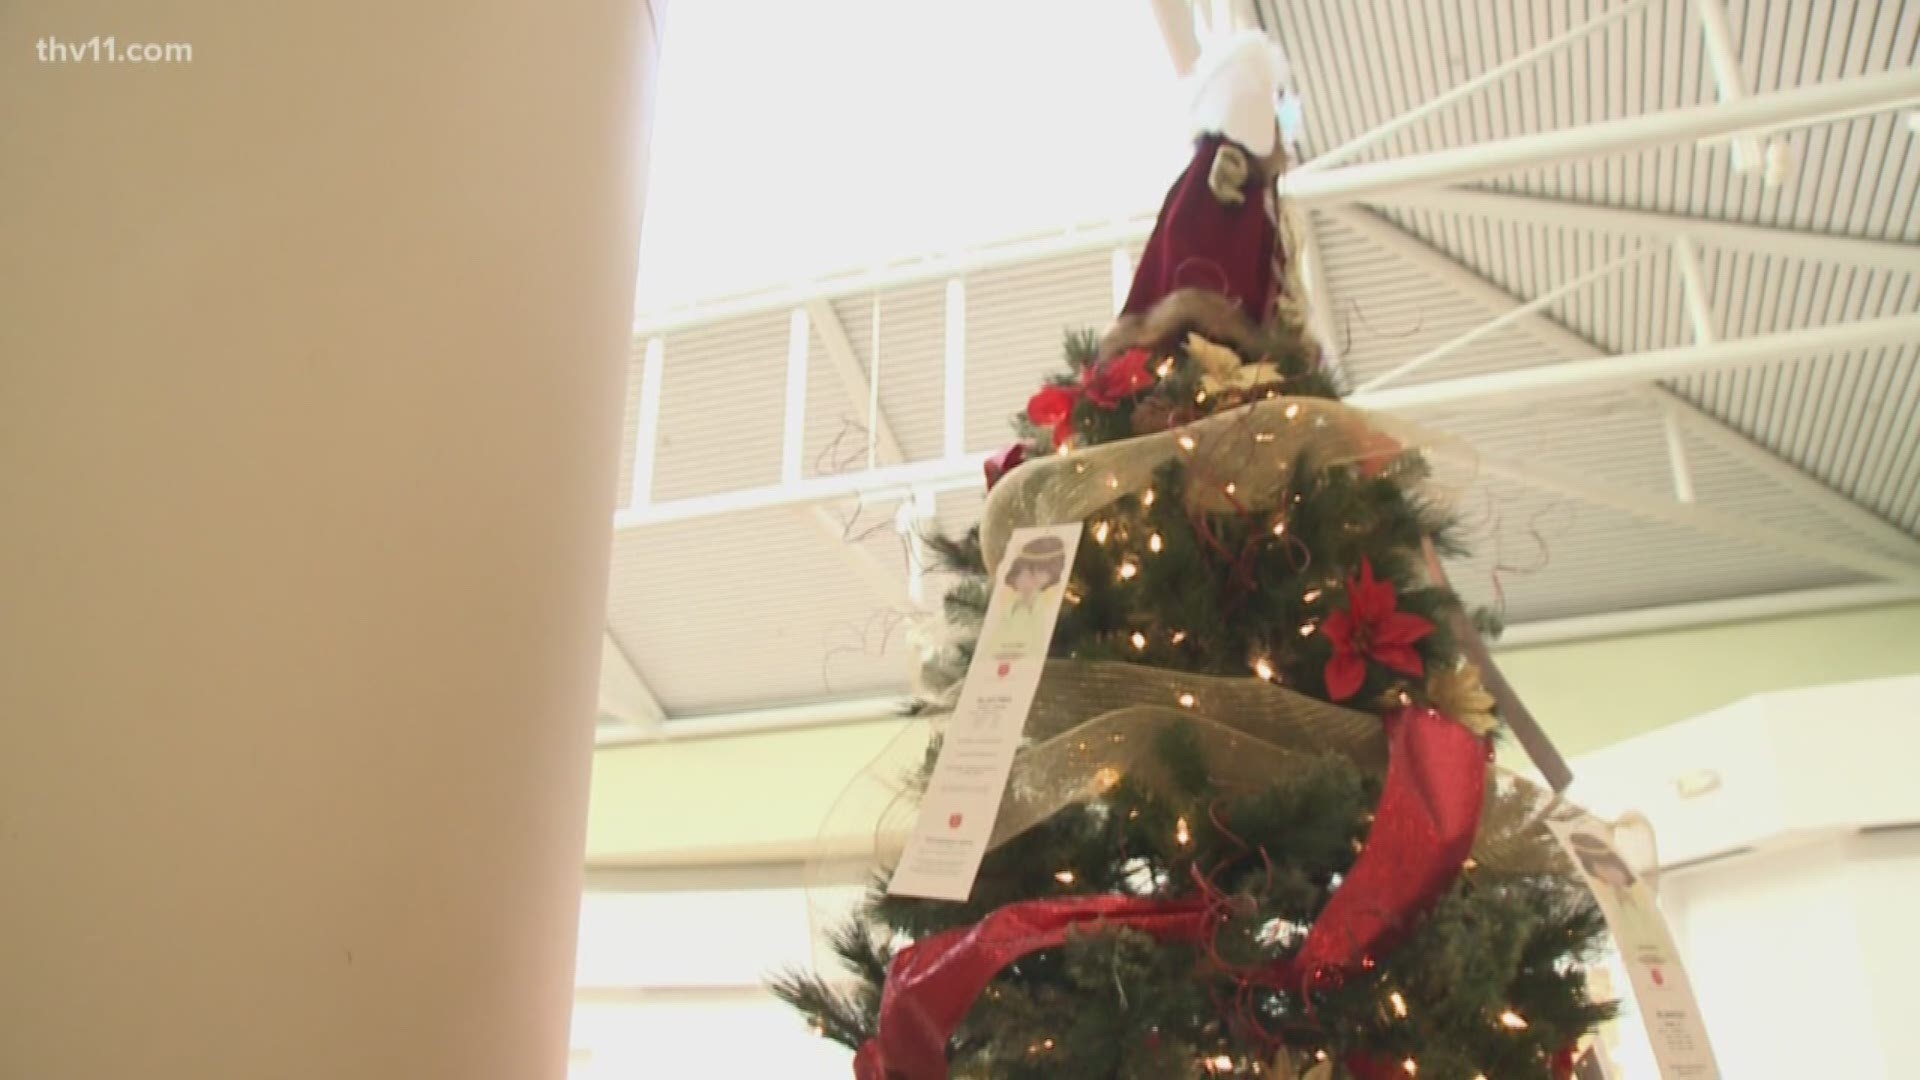 A single mother of four said if it wasn't for the Salvation Army's Angel Tree program, her kids would've had nothing.